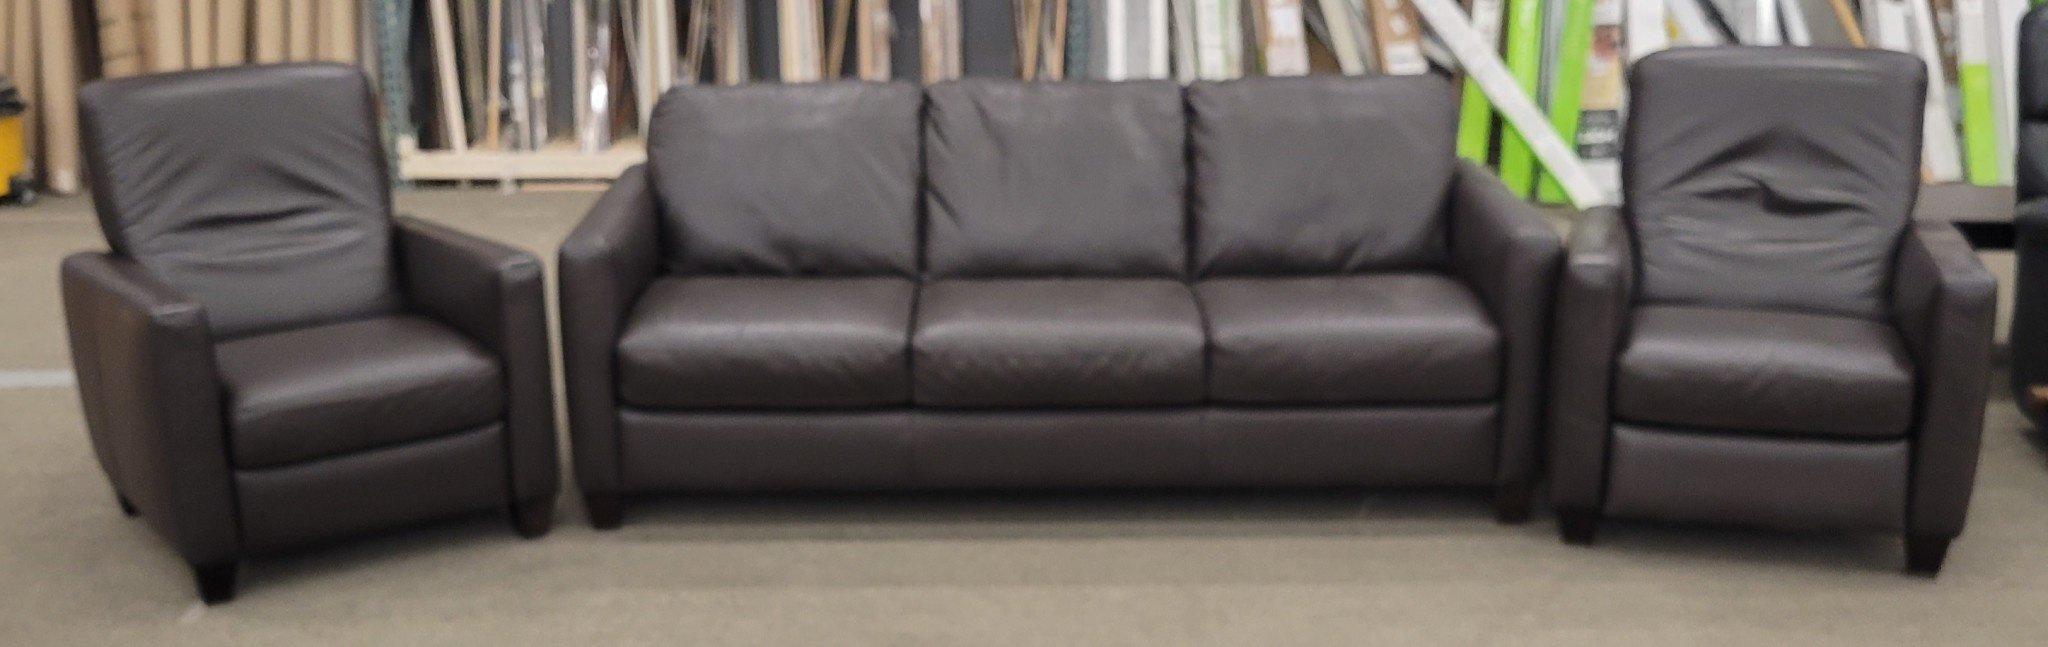 Add the Beauty of Natuzzi to Your Living Room Without Spending a Fortune! 